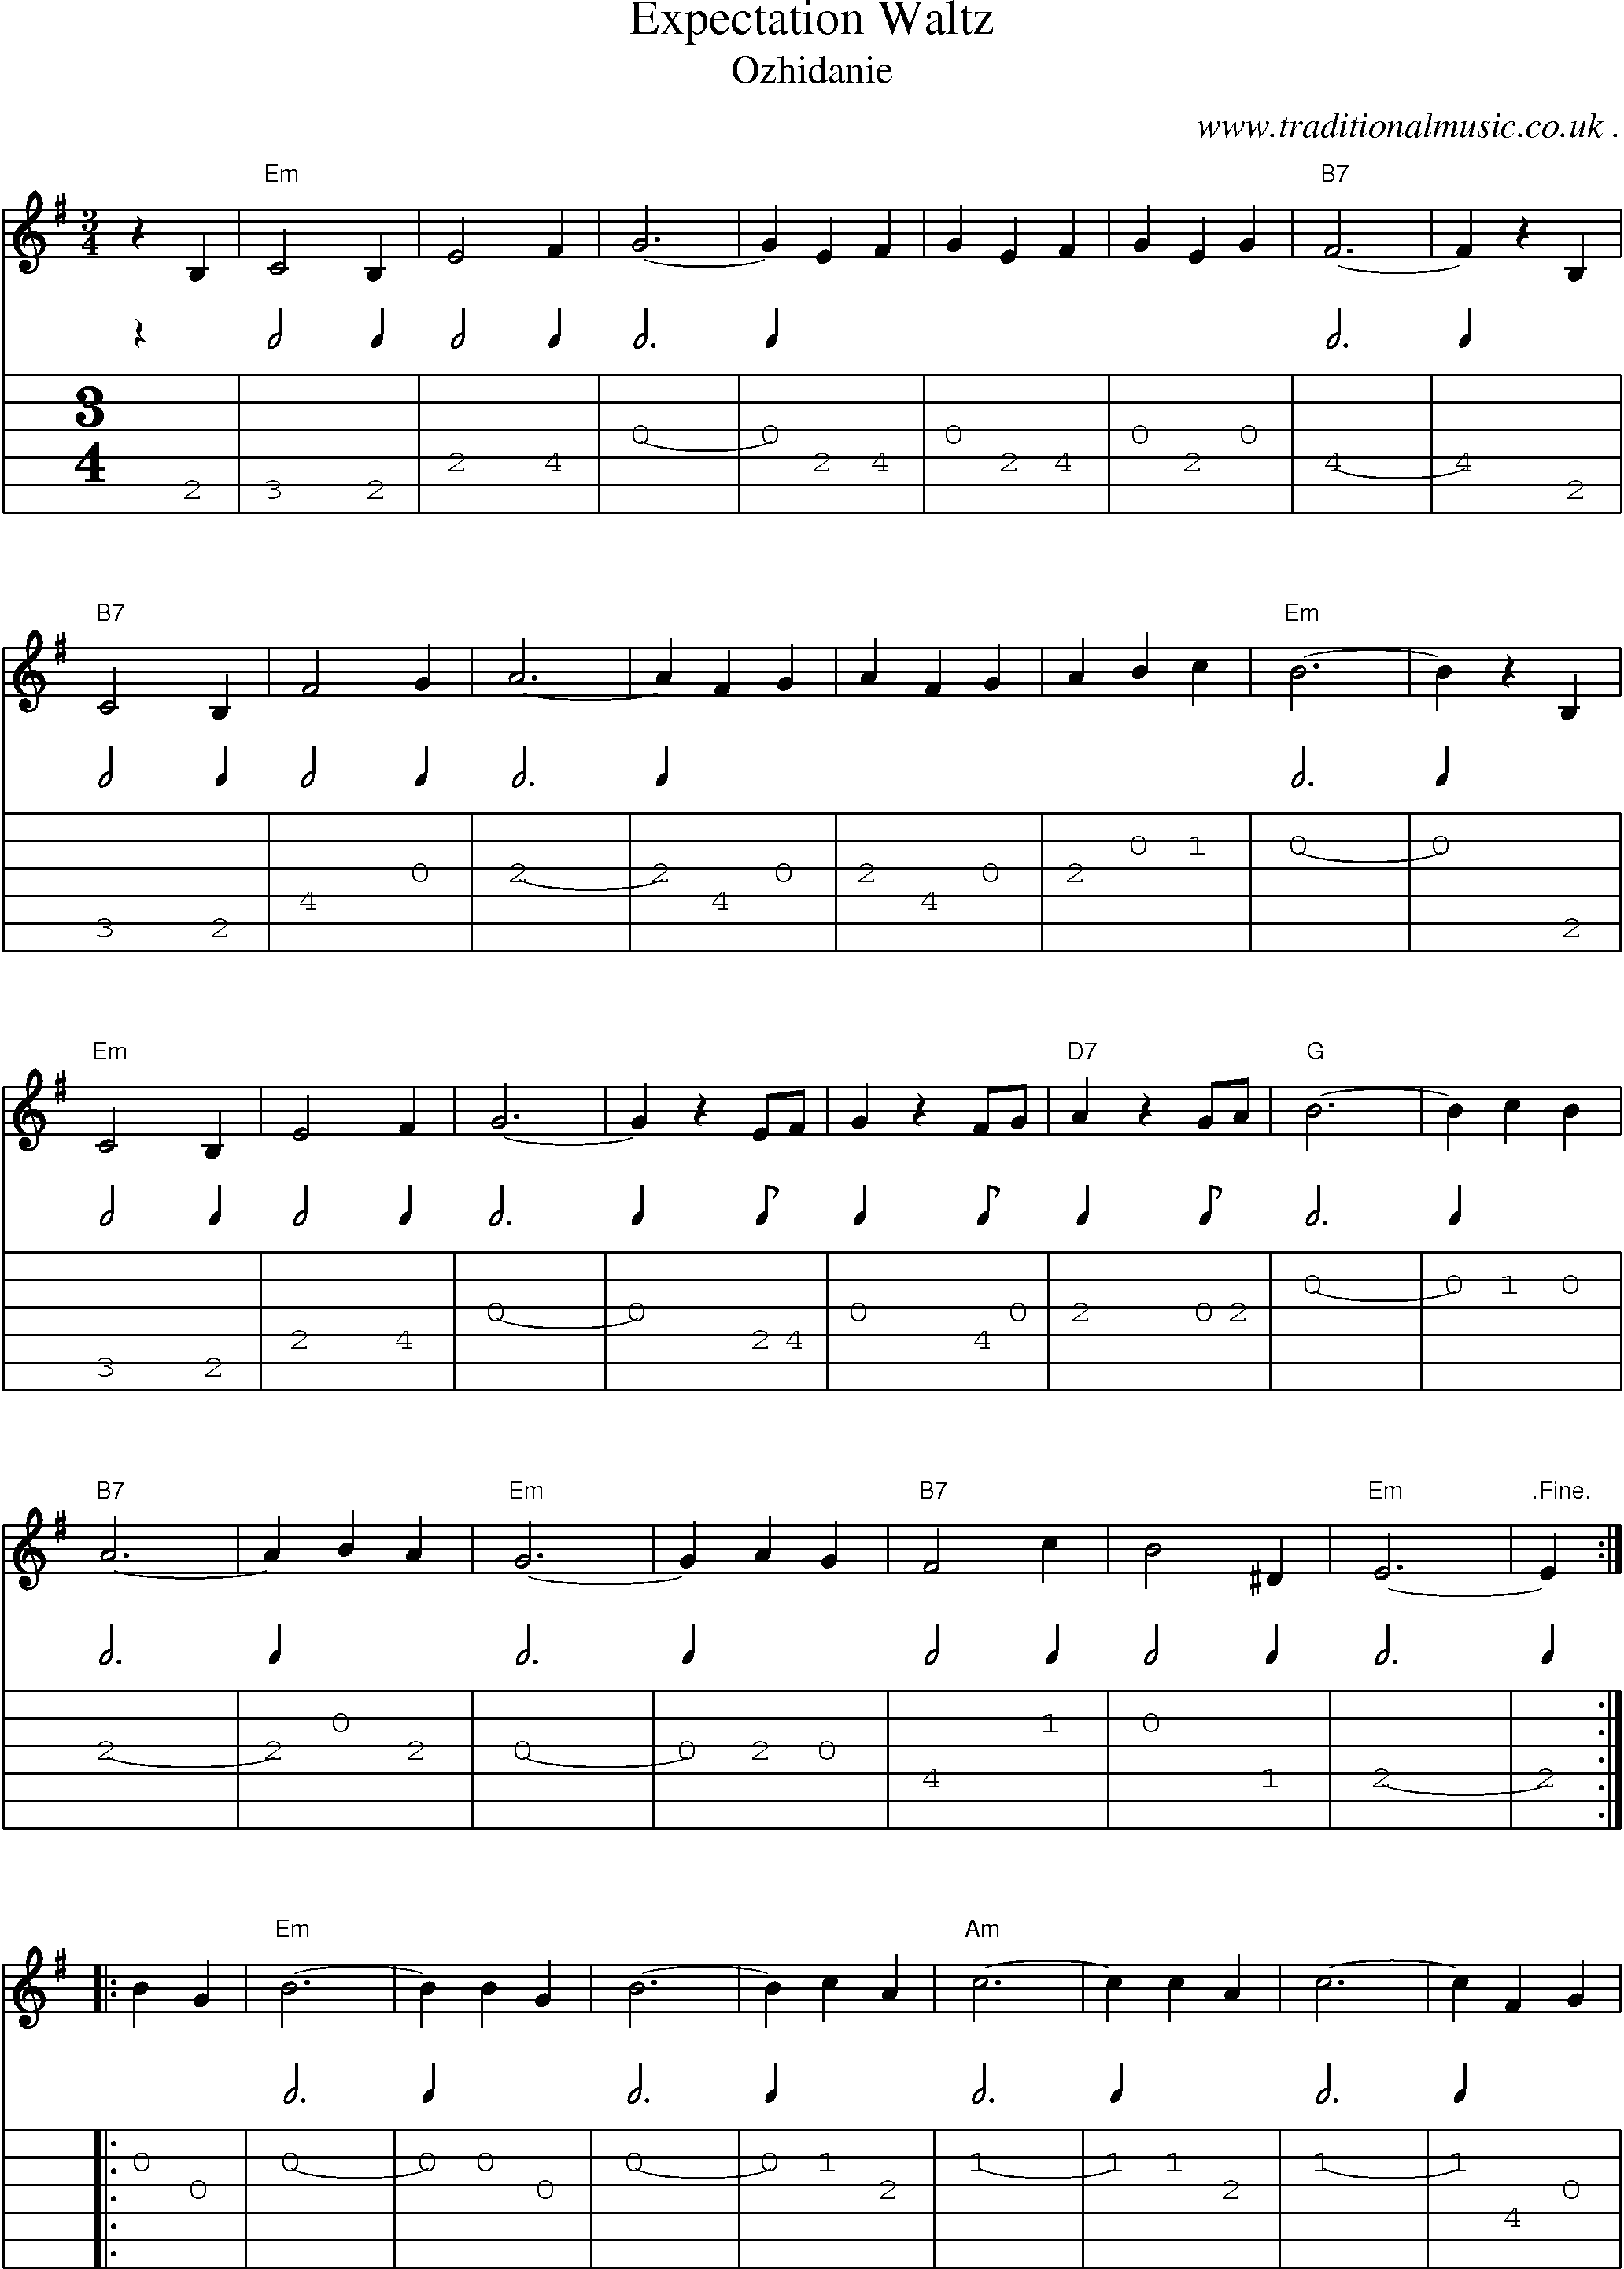 Music Score and Guitar Tabs for Expectation Waltz